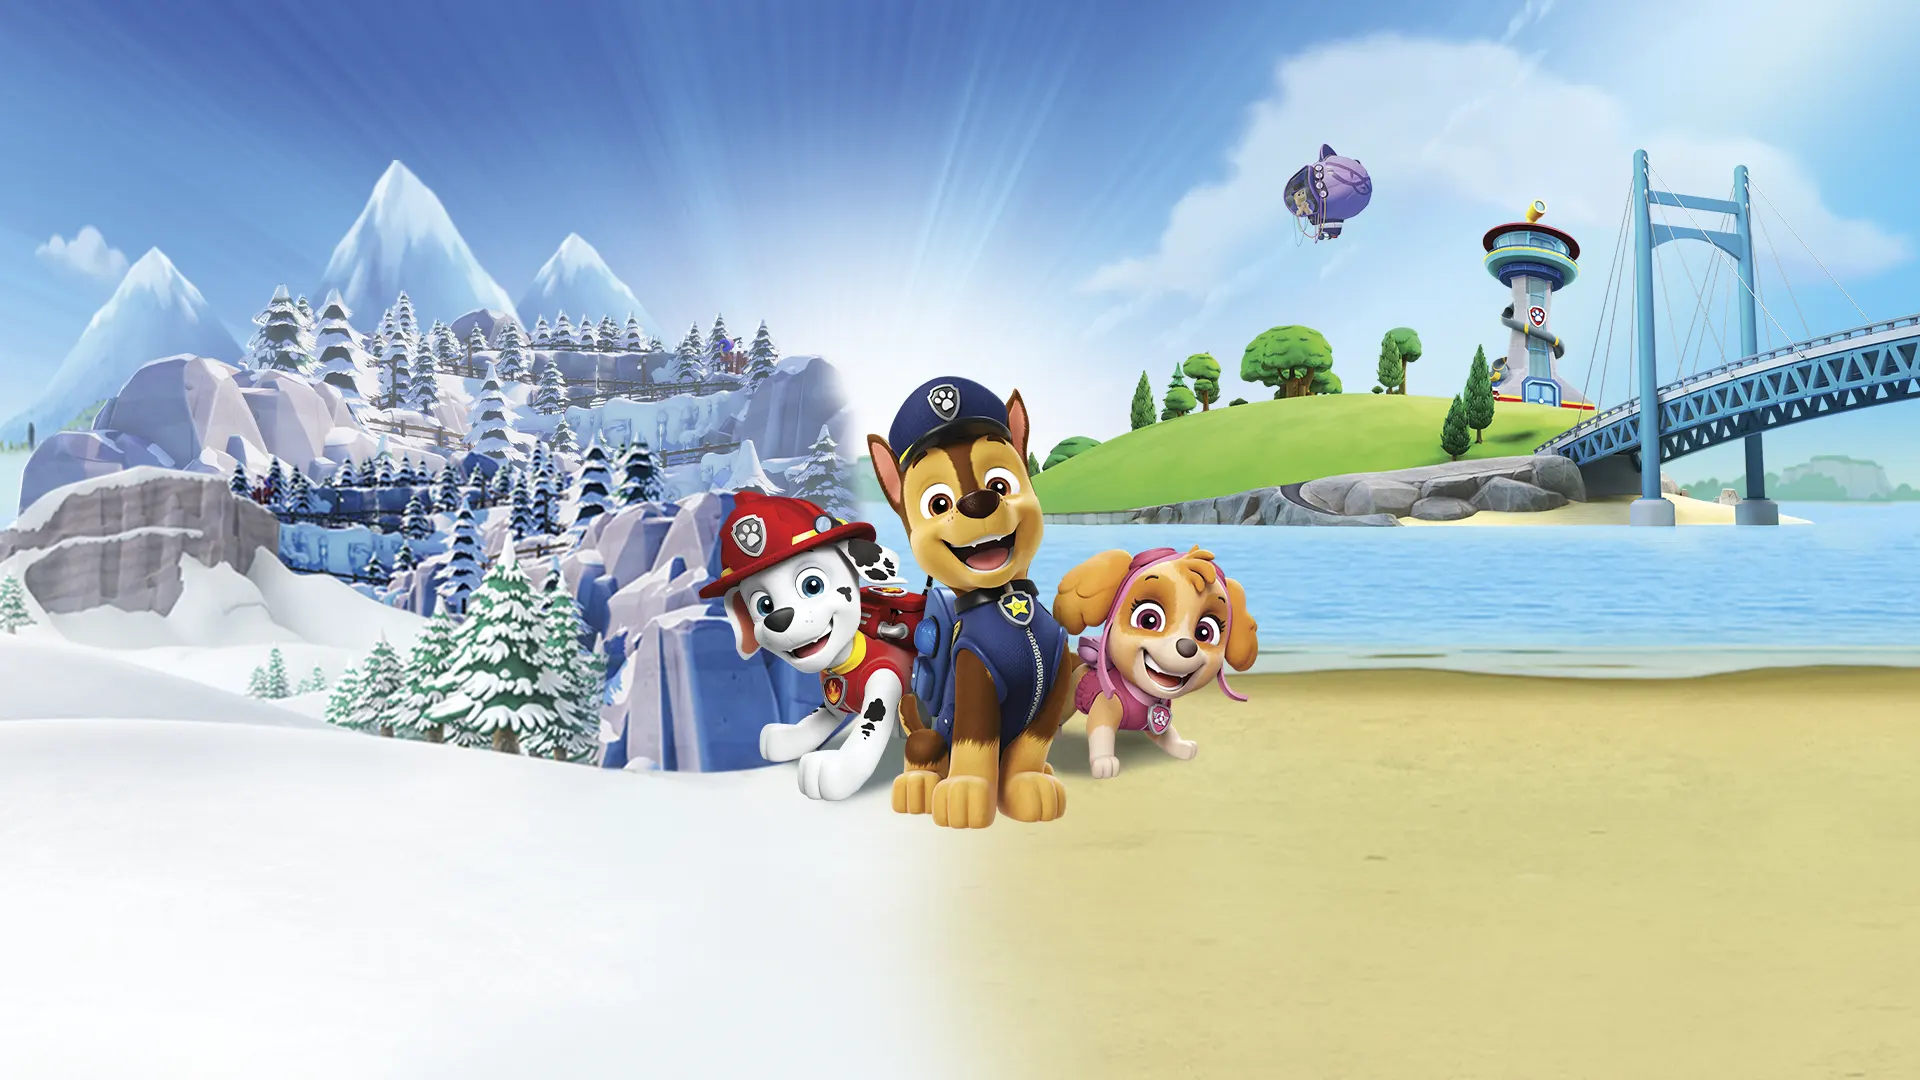 PAW Patrol World - Kids Videogame - Outright Games